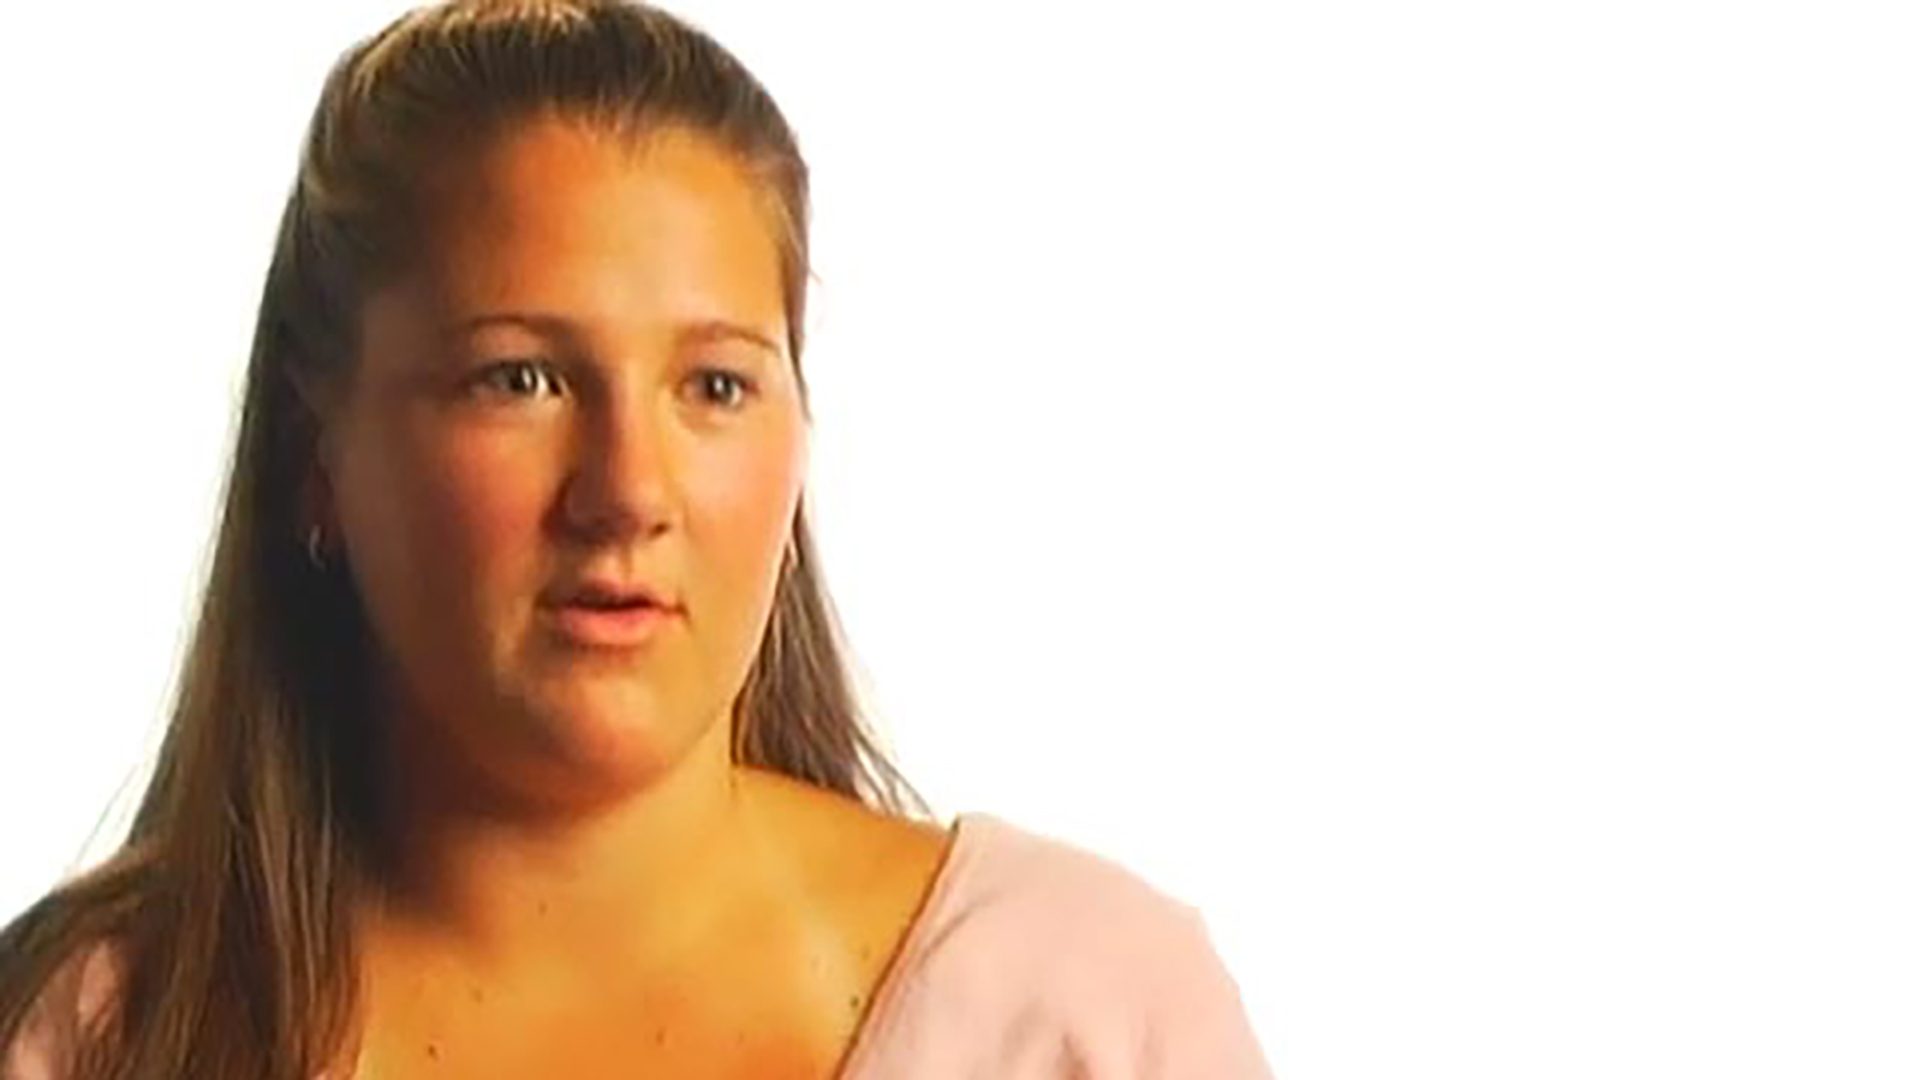 A young adult woman wearing a pink shirt is interviewed against a white background.